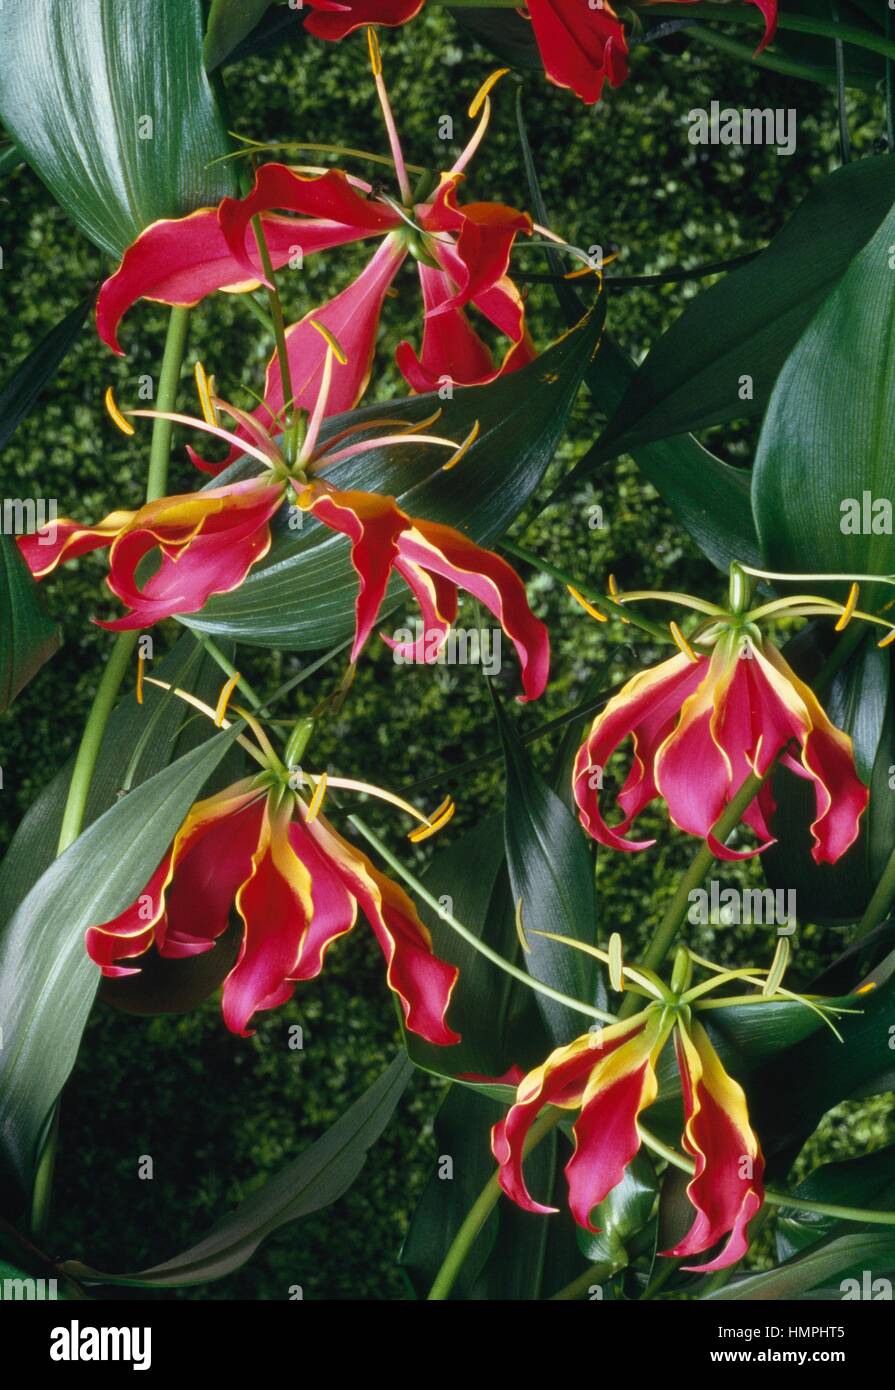 Flame lily, Fire lily or Gloriosa lily (Gloriosa verschaffeltii), Colchicaceae. Stock Photo